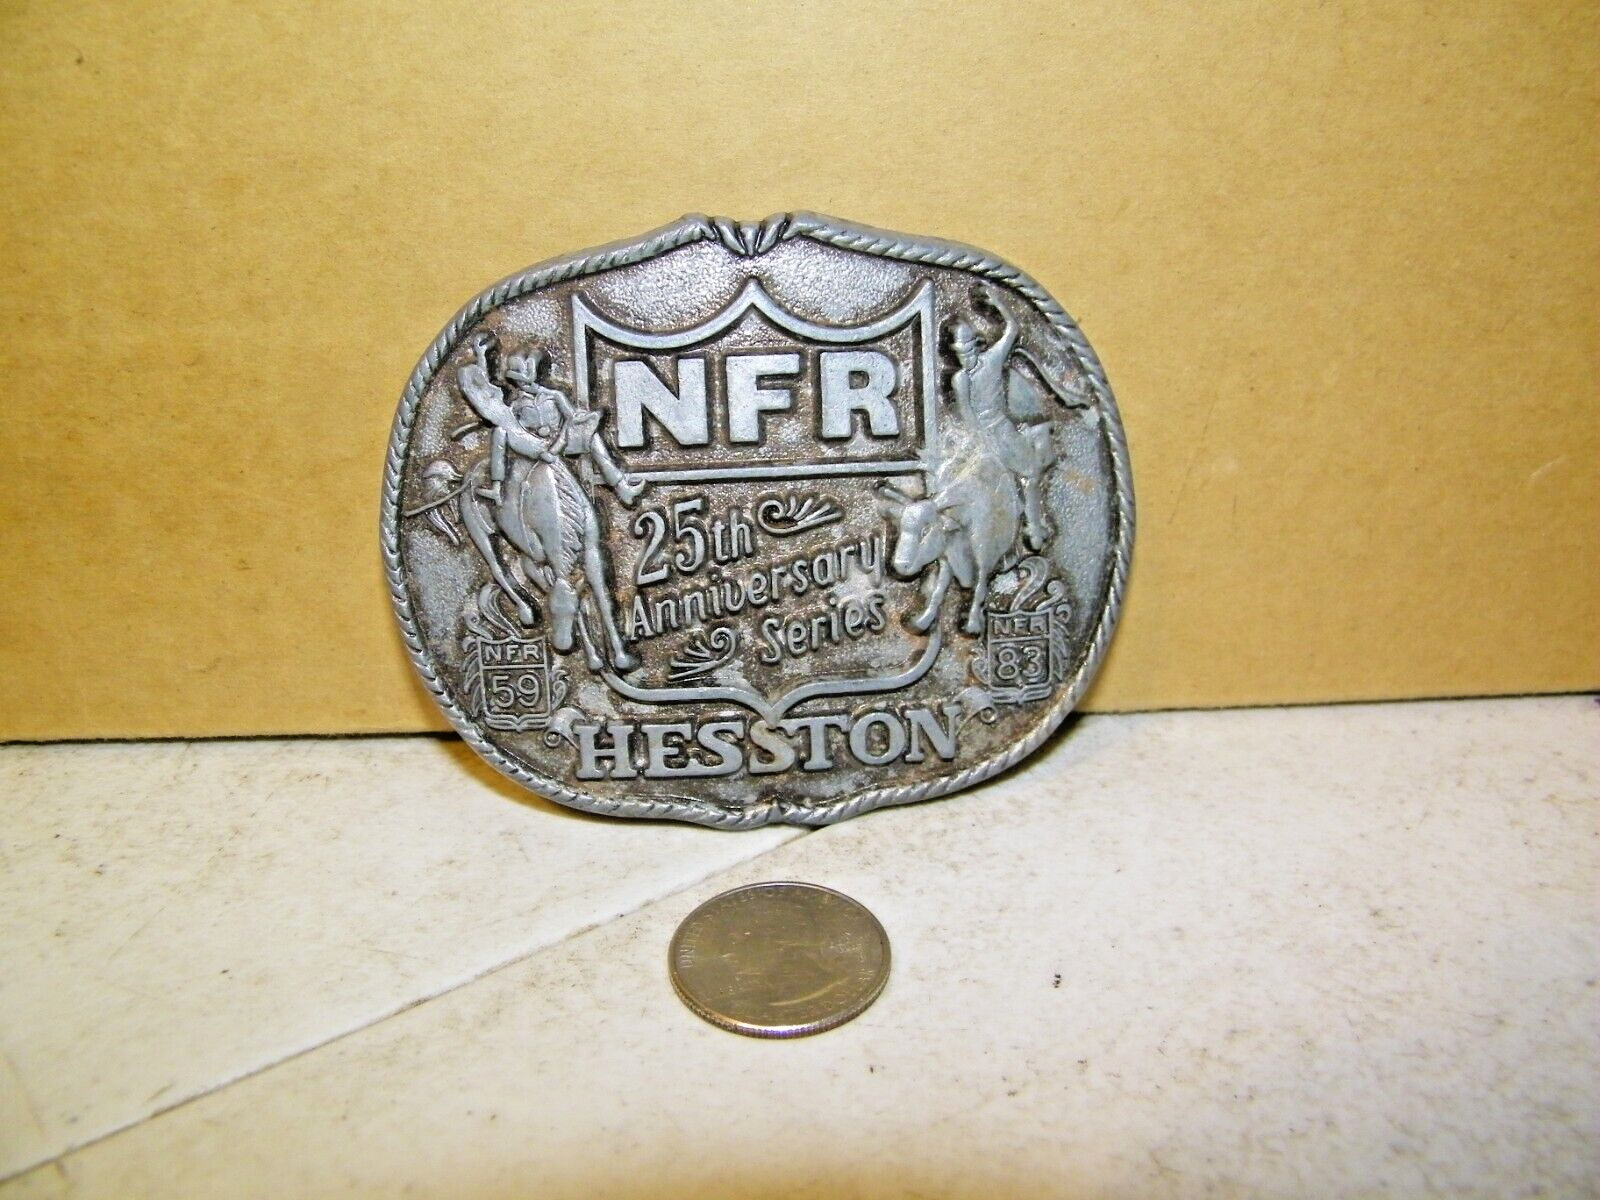 1983 Mens Hesston NFR National Finals Rodeo 25th Anniversary  Belt Buckle 1st Ed